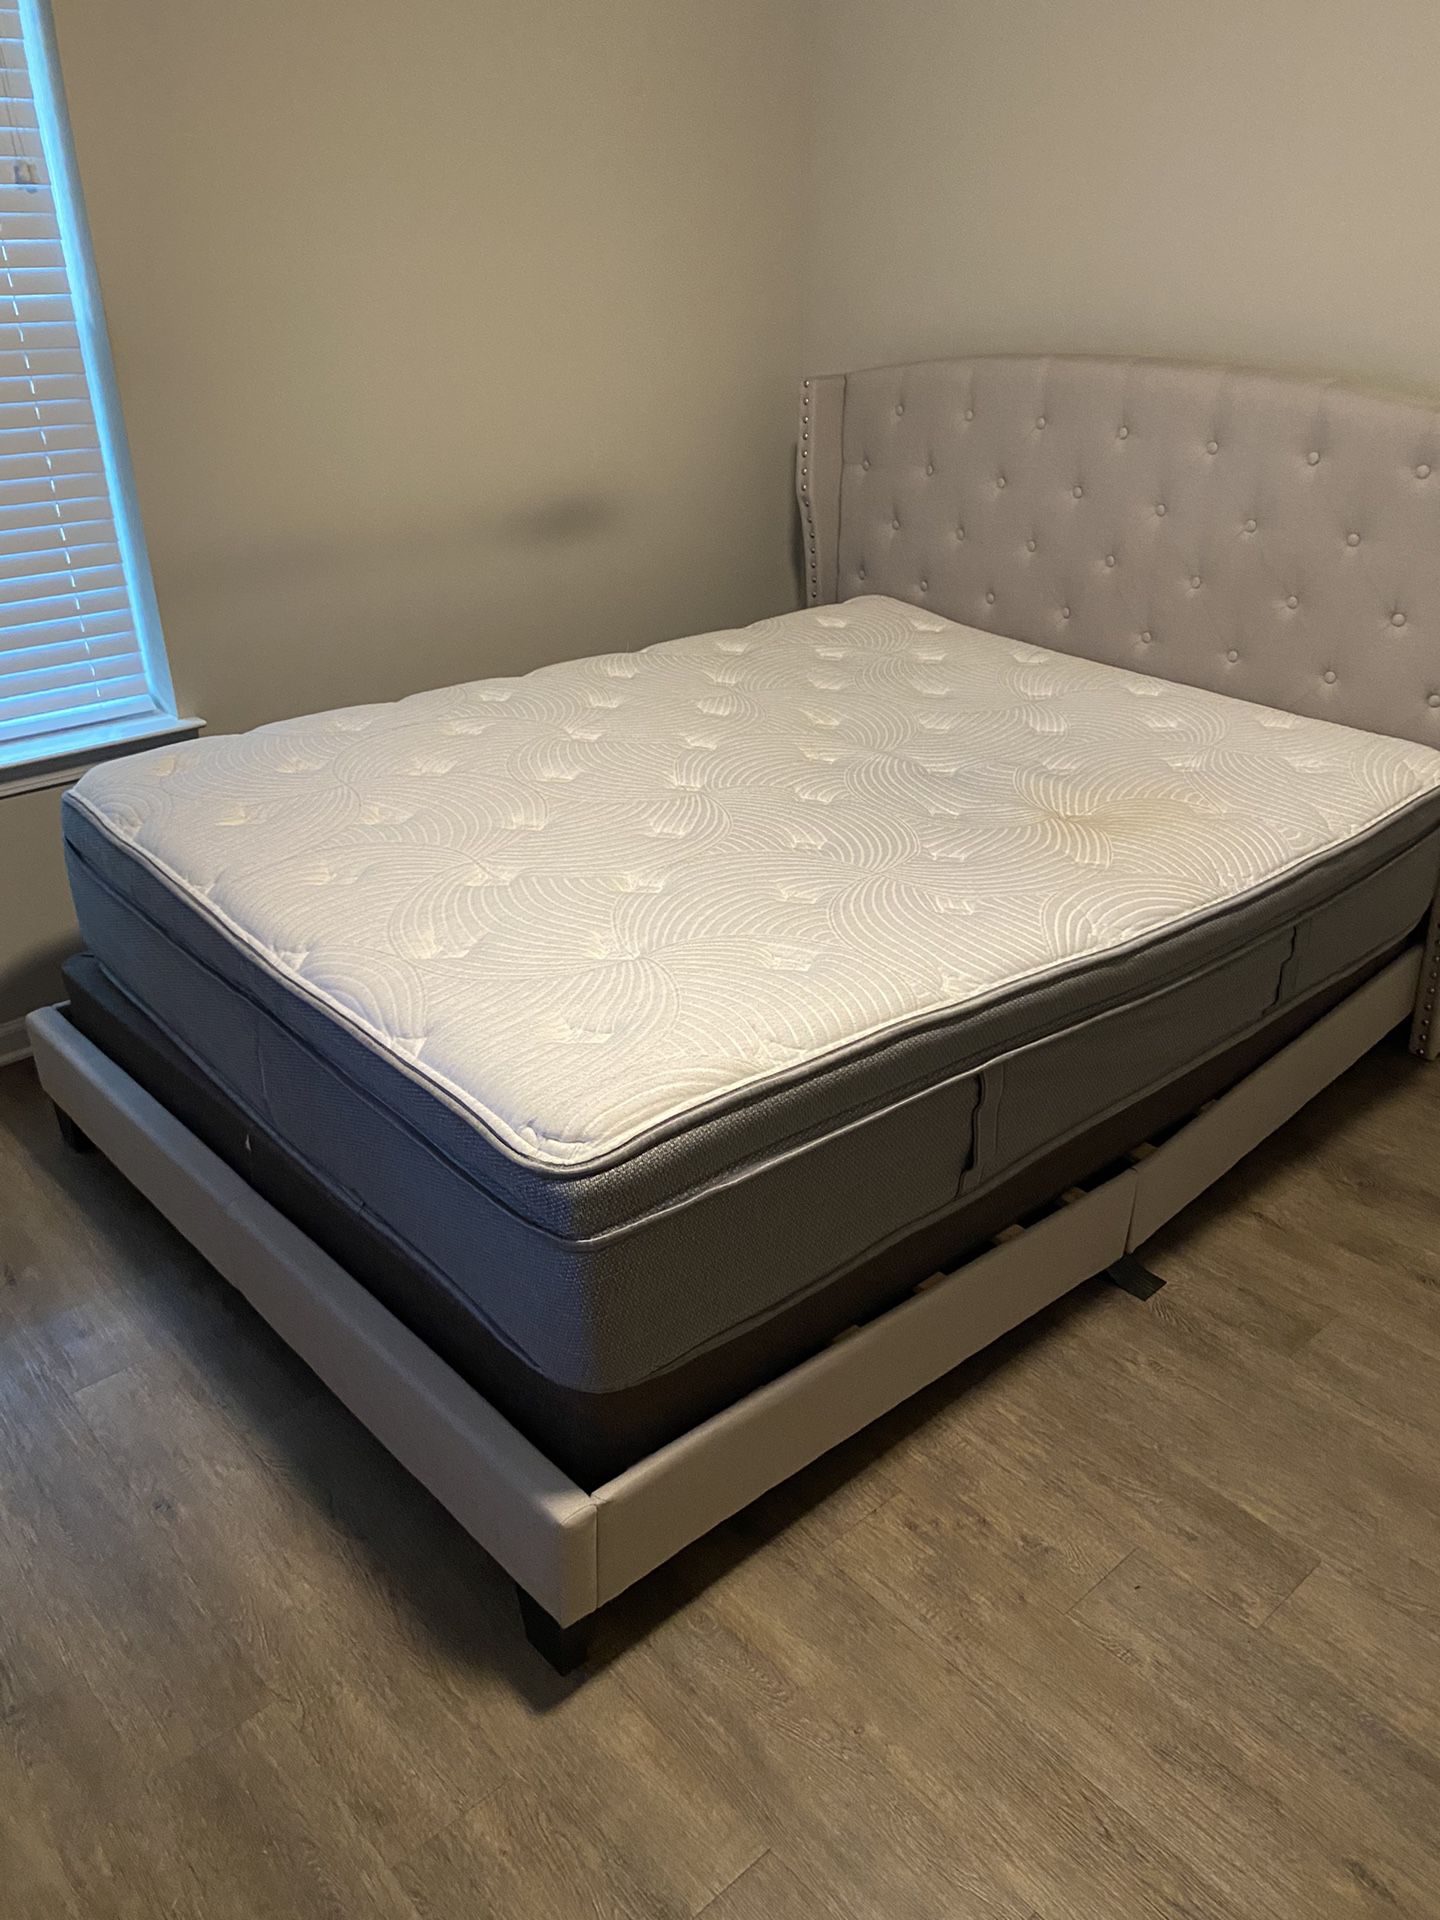 1 Year Old Queen Size Head Board Bed Frame And Mattress With Box Spring  